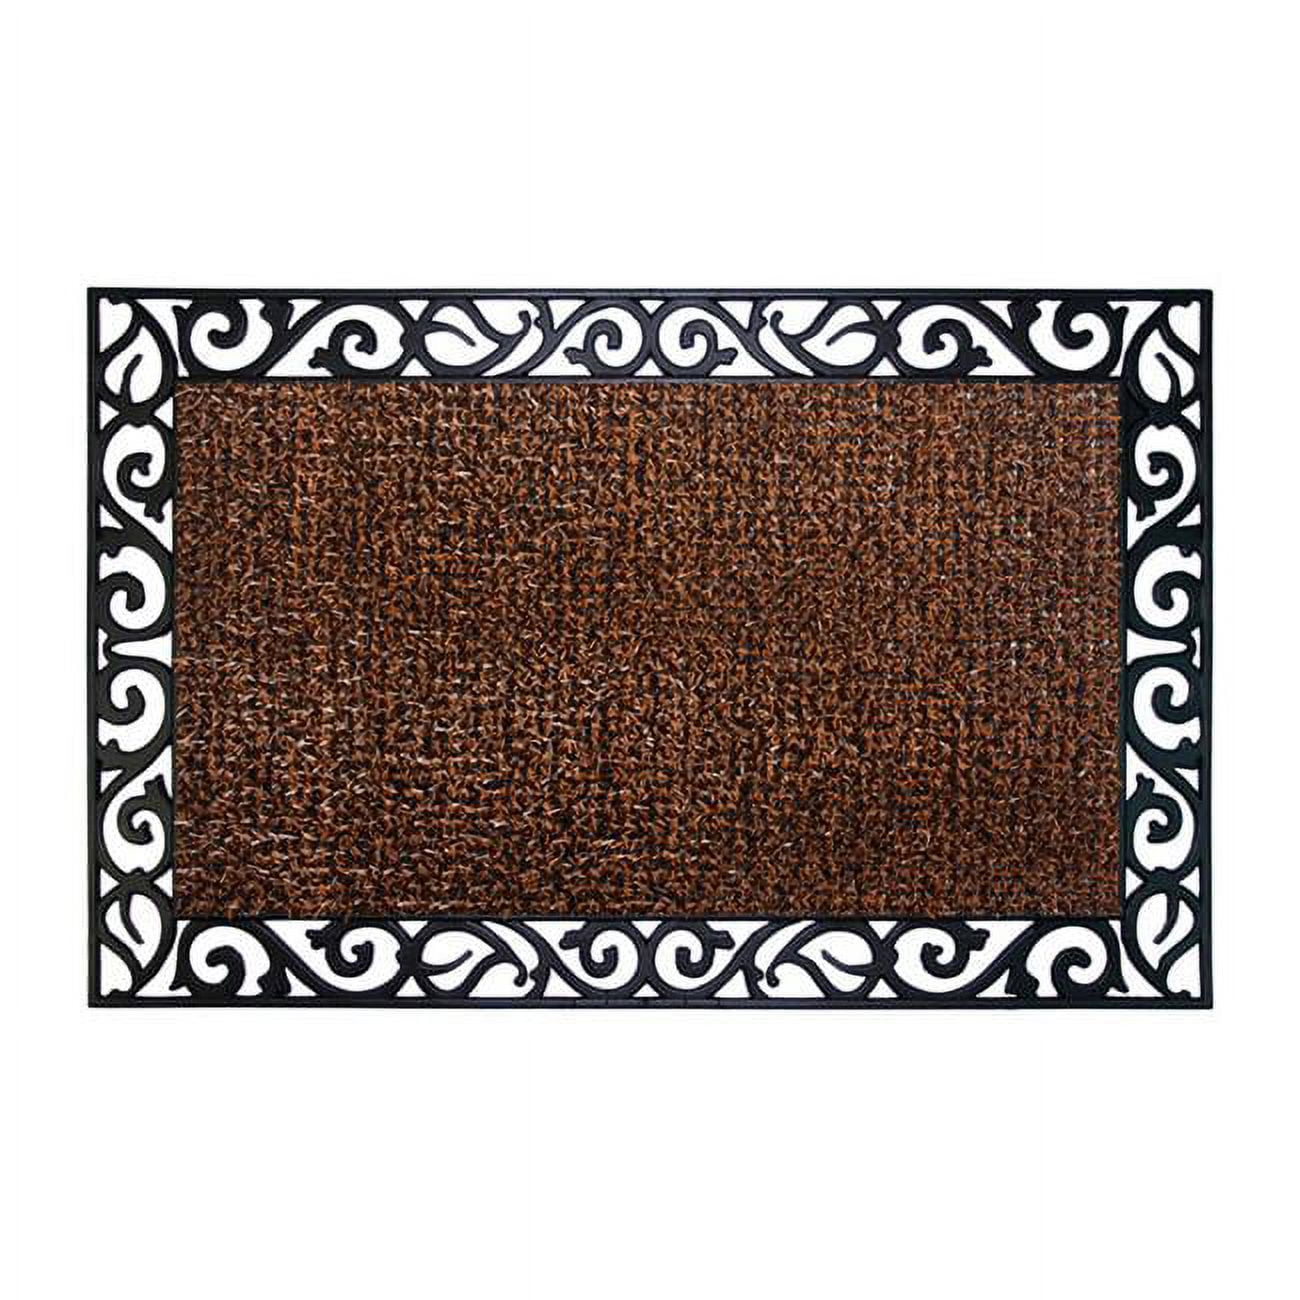 6564850 Wrought Iron Stems & Leaves Style Polyethylene & Rubber Nonslip Door Mat, Brown - 36 X 24 In.